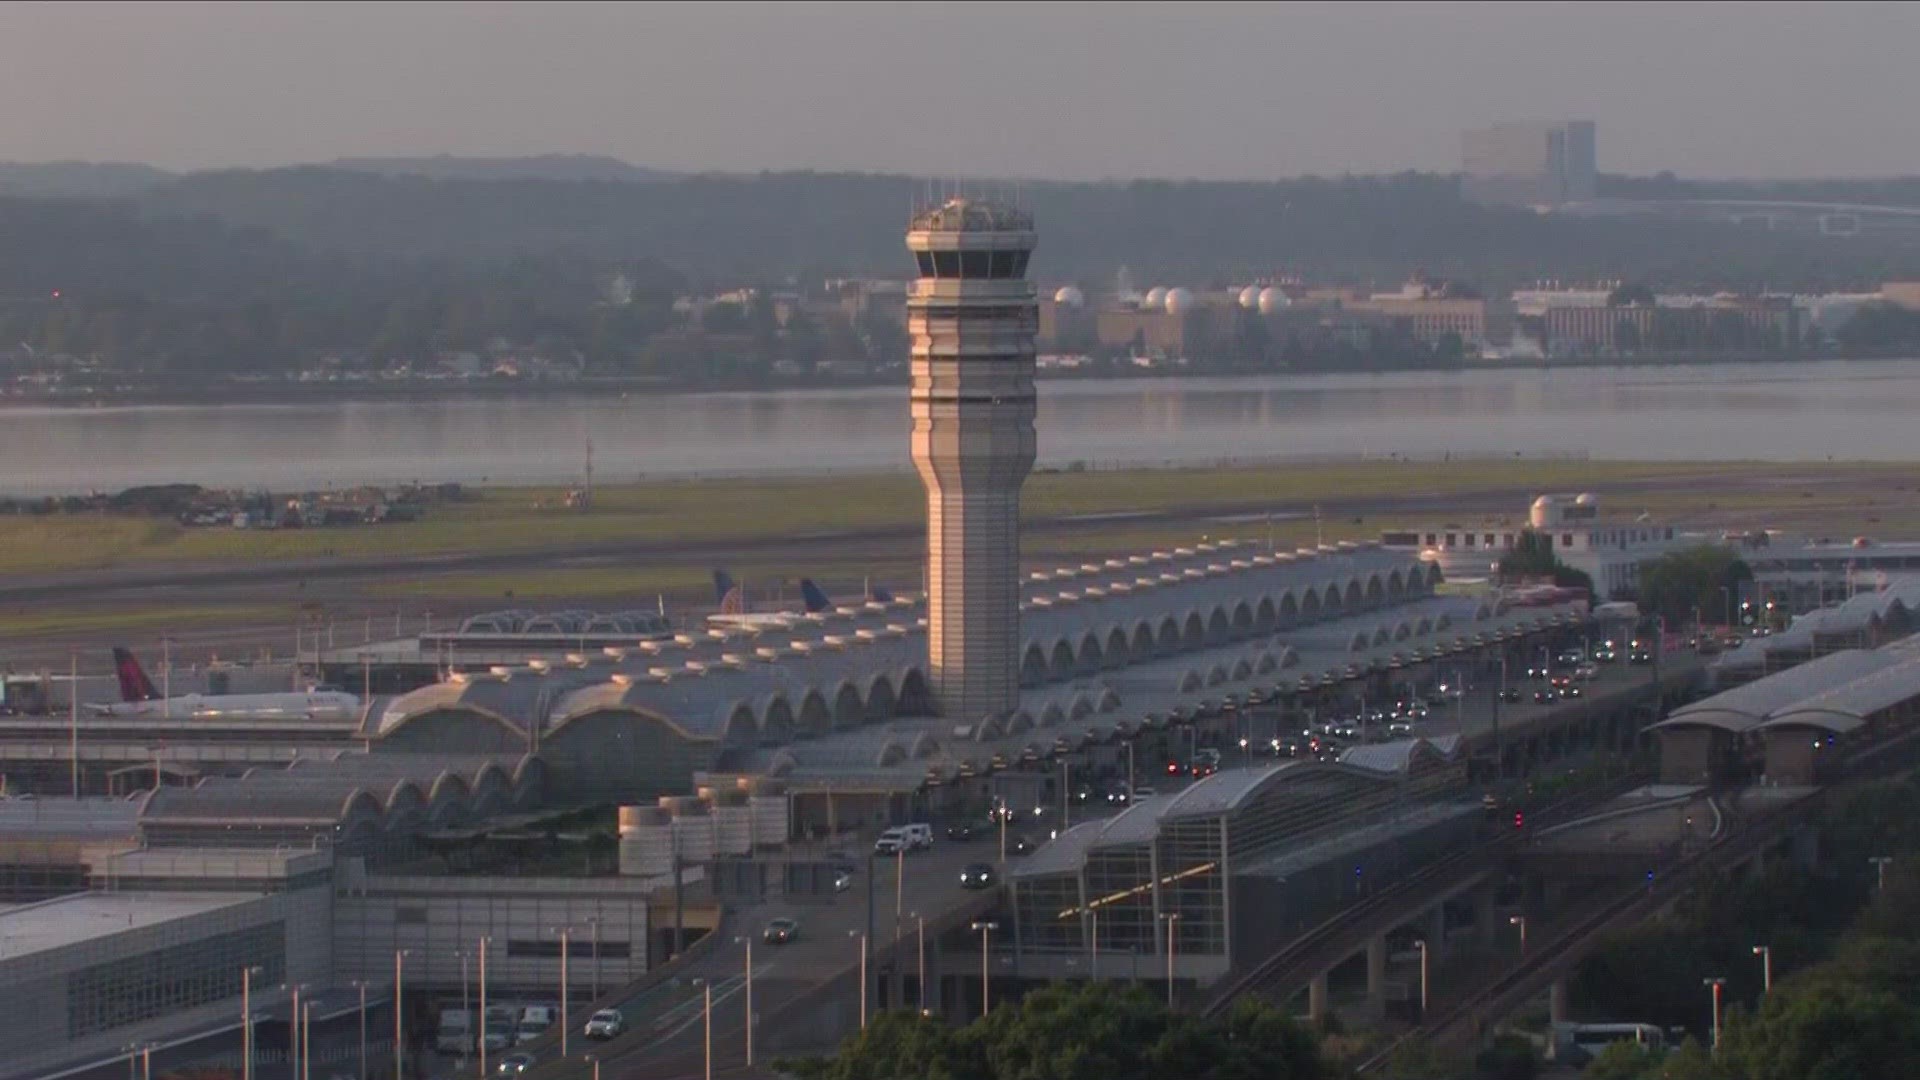 Members of Congress from each party filed the bill to add more long-distance flights to and from Reagan National Airport, though many details are up in the air.